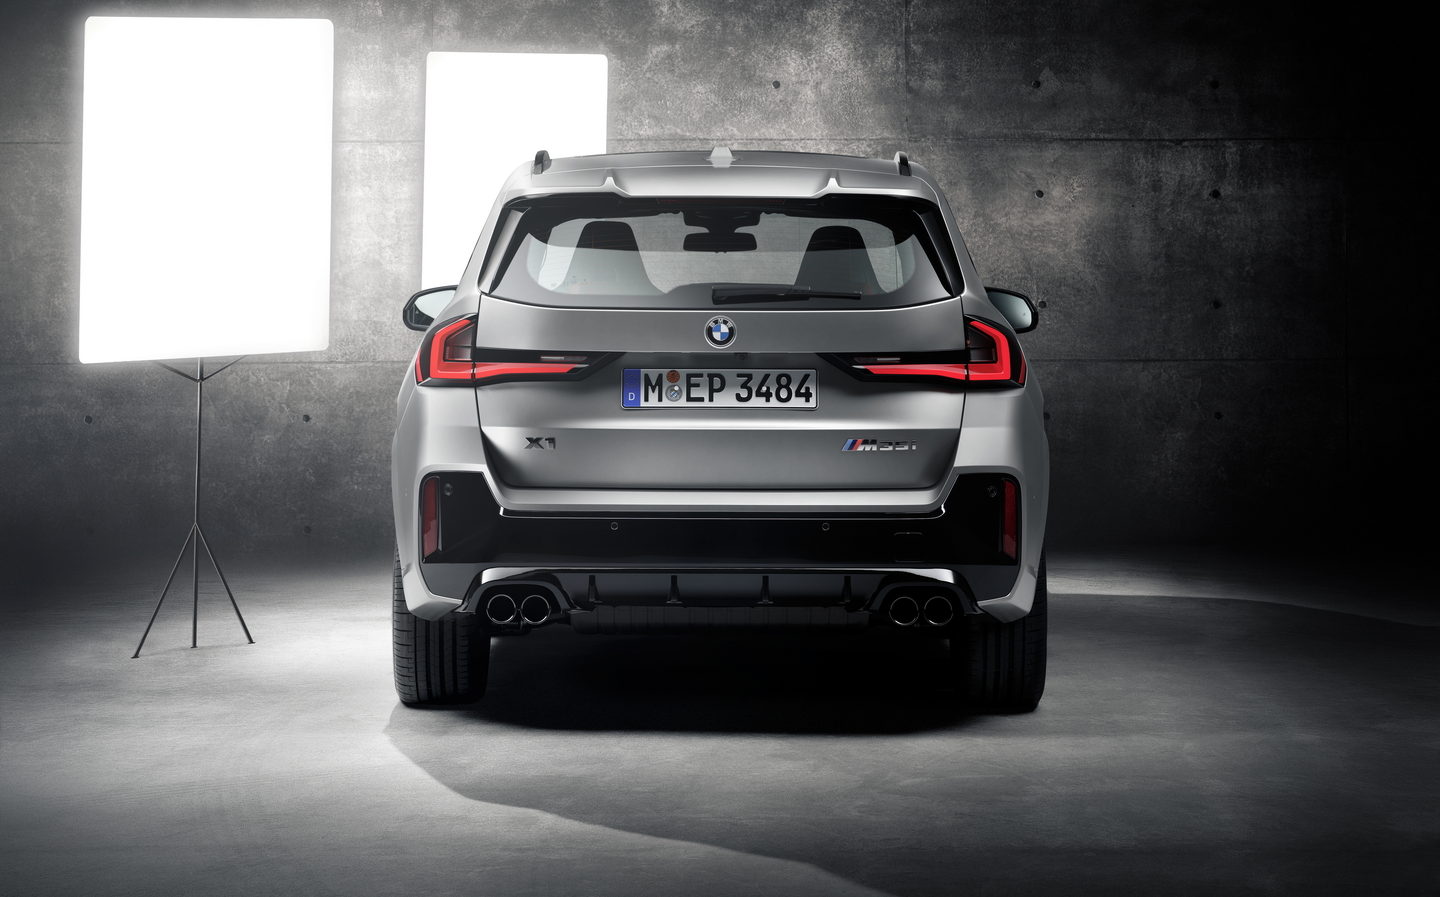 BMW's smallest SUV gets the M treatment — creating the 296bhp X1 M35i